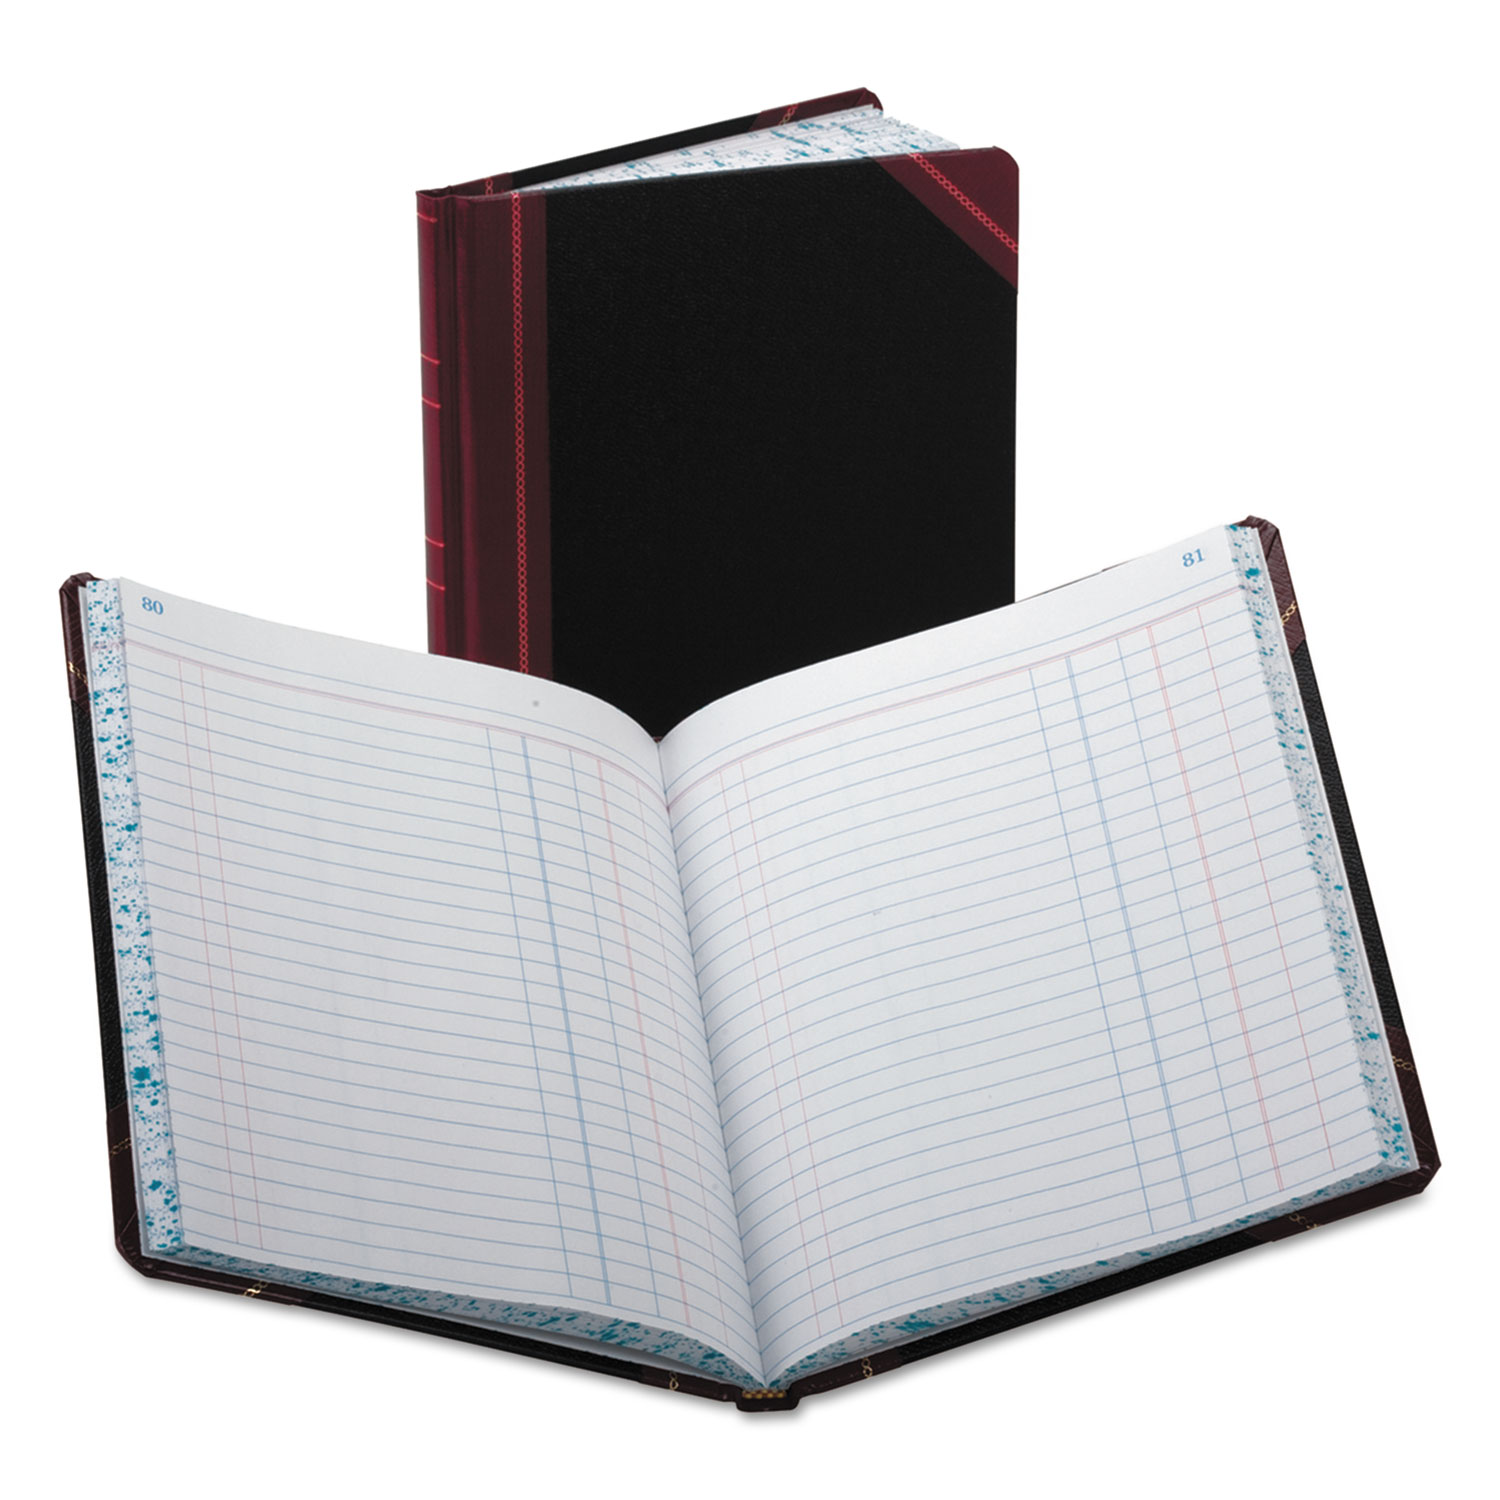  Boorum & Pease 38-150-J Record/Account Book, Journal Rule, Black/Red, 150 Pages, 9 5/8 x 7 5/8 (BOR38150J) 